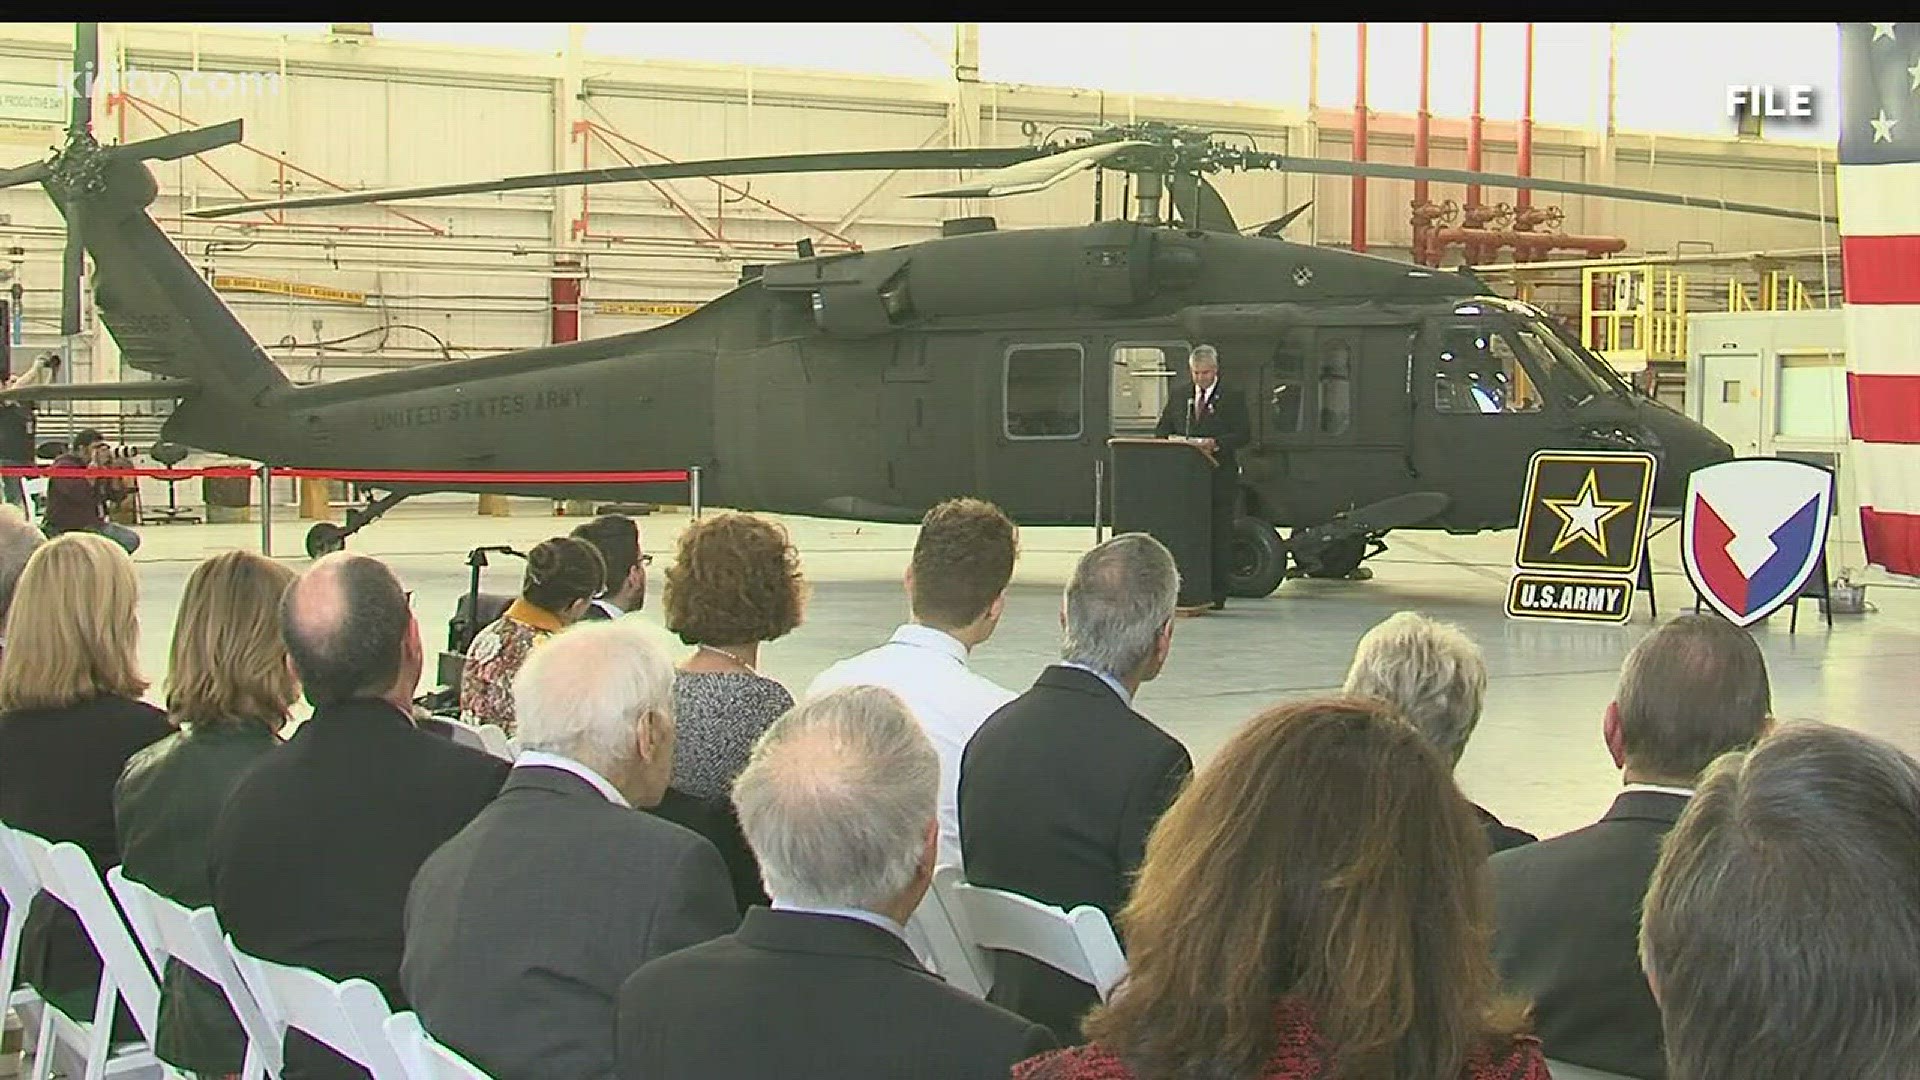 Keeping the U.S. Army's helicopter fleet in tip-top shape is the main mission of the Corpus Christi Army Depot. On Friday, they celebrated 57 years of doing just that.